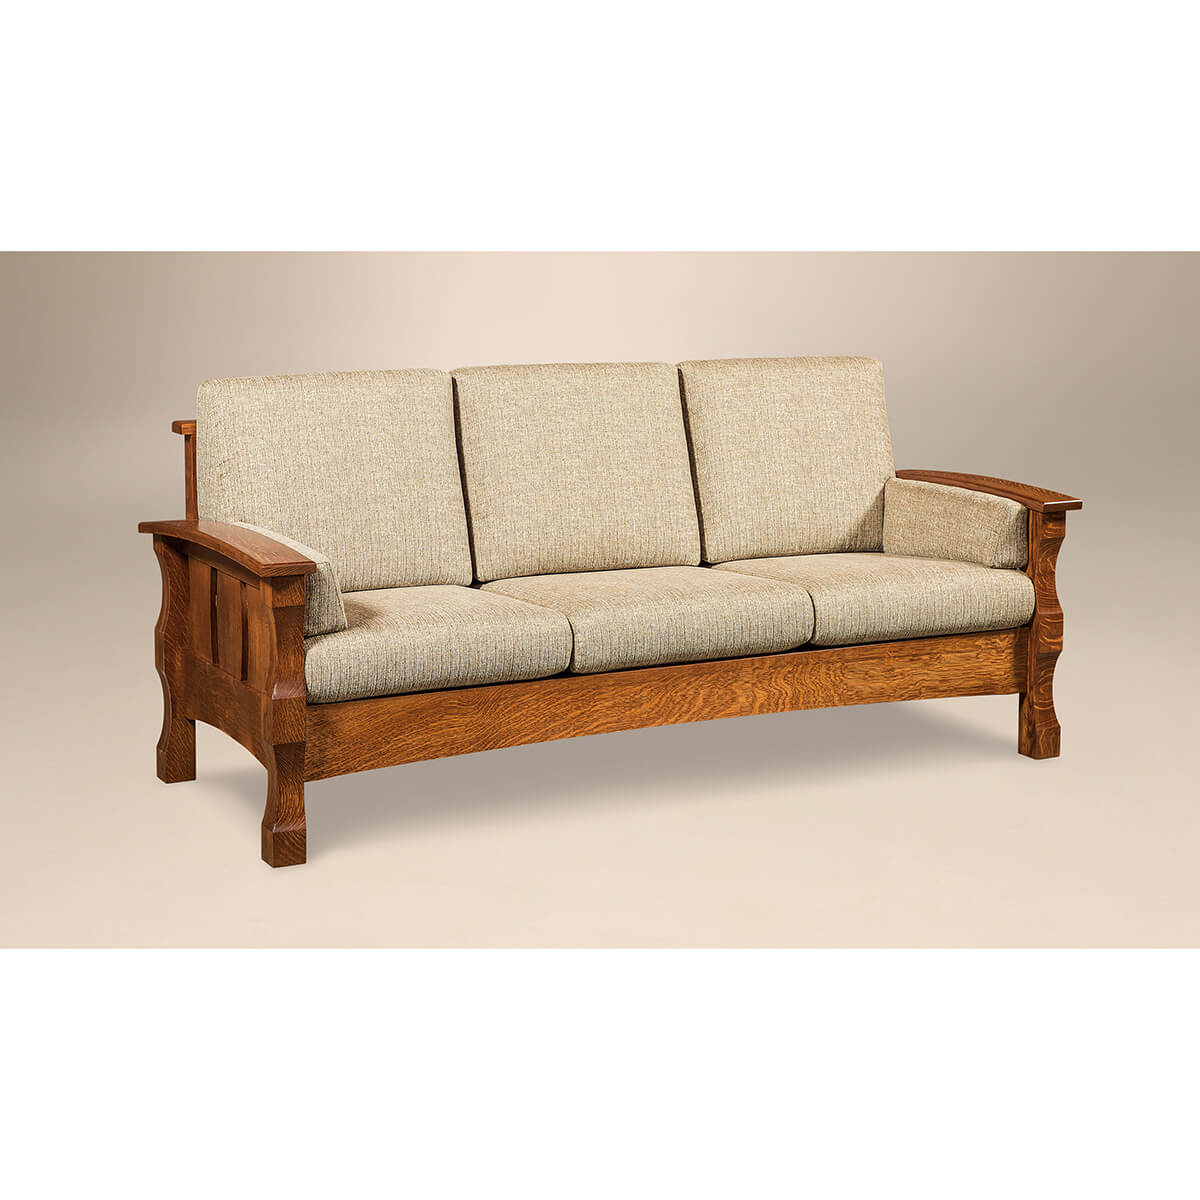 Read more about the article Balboa Sofa